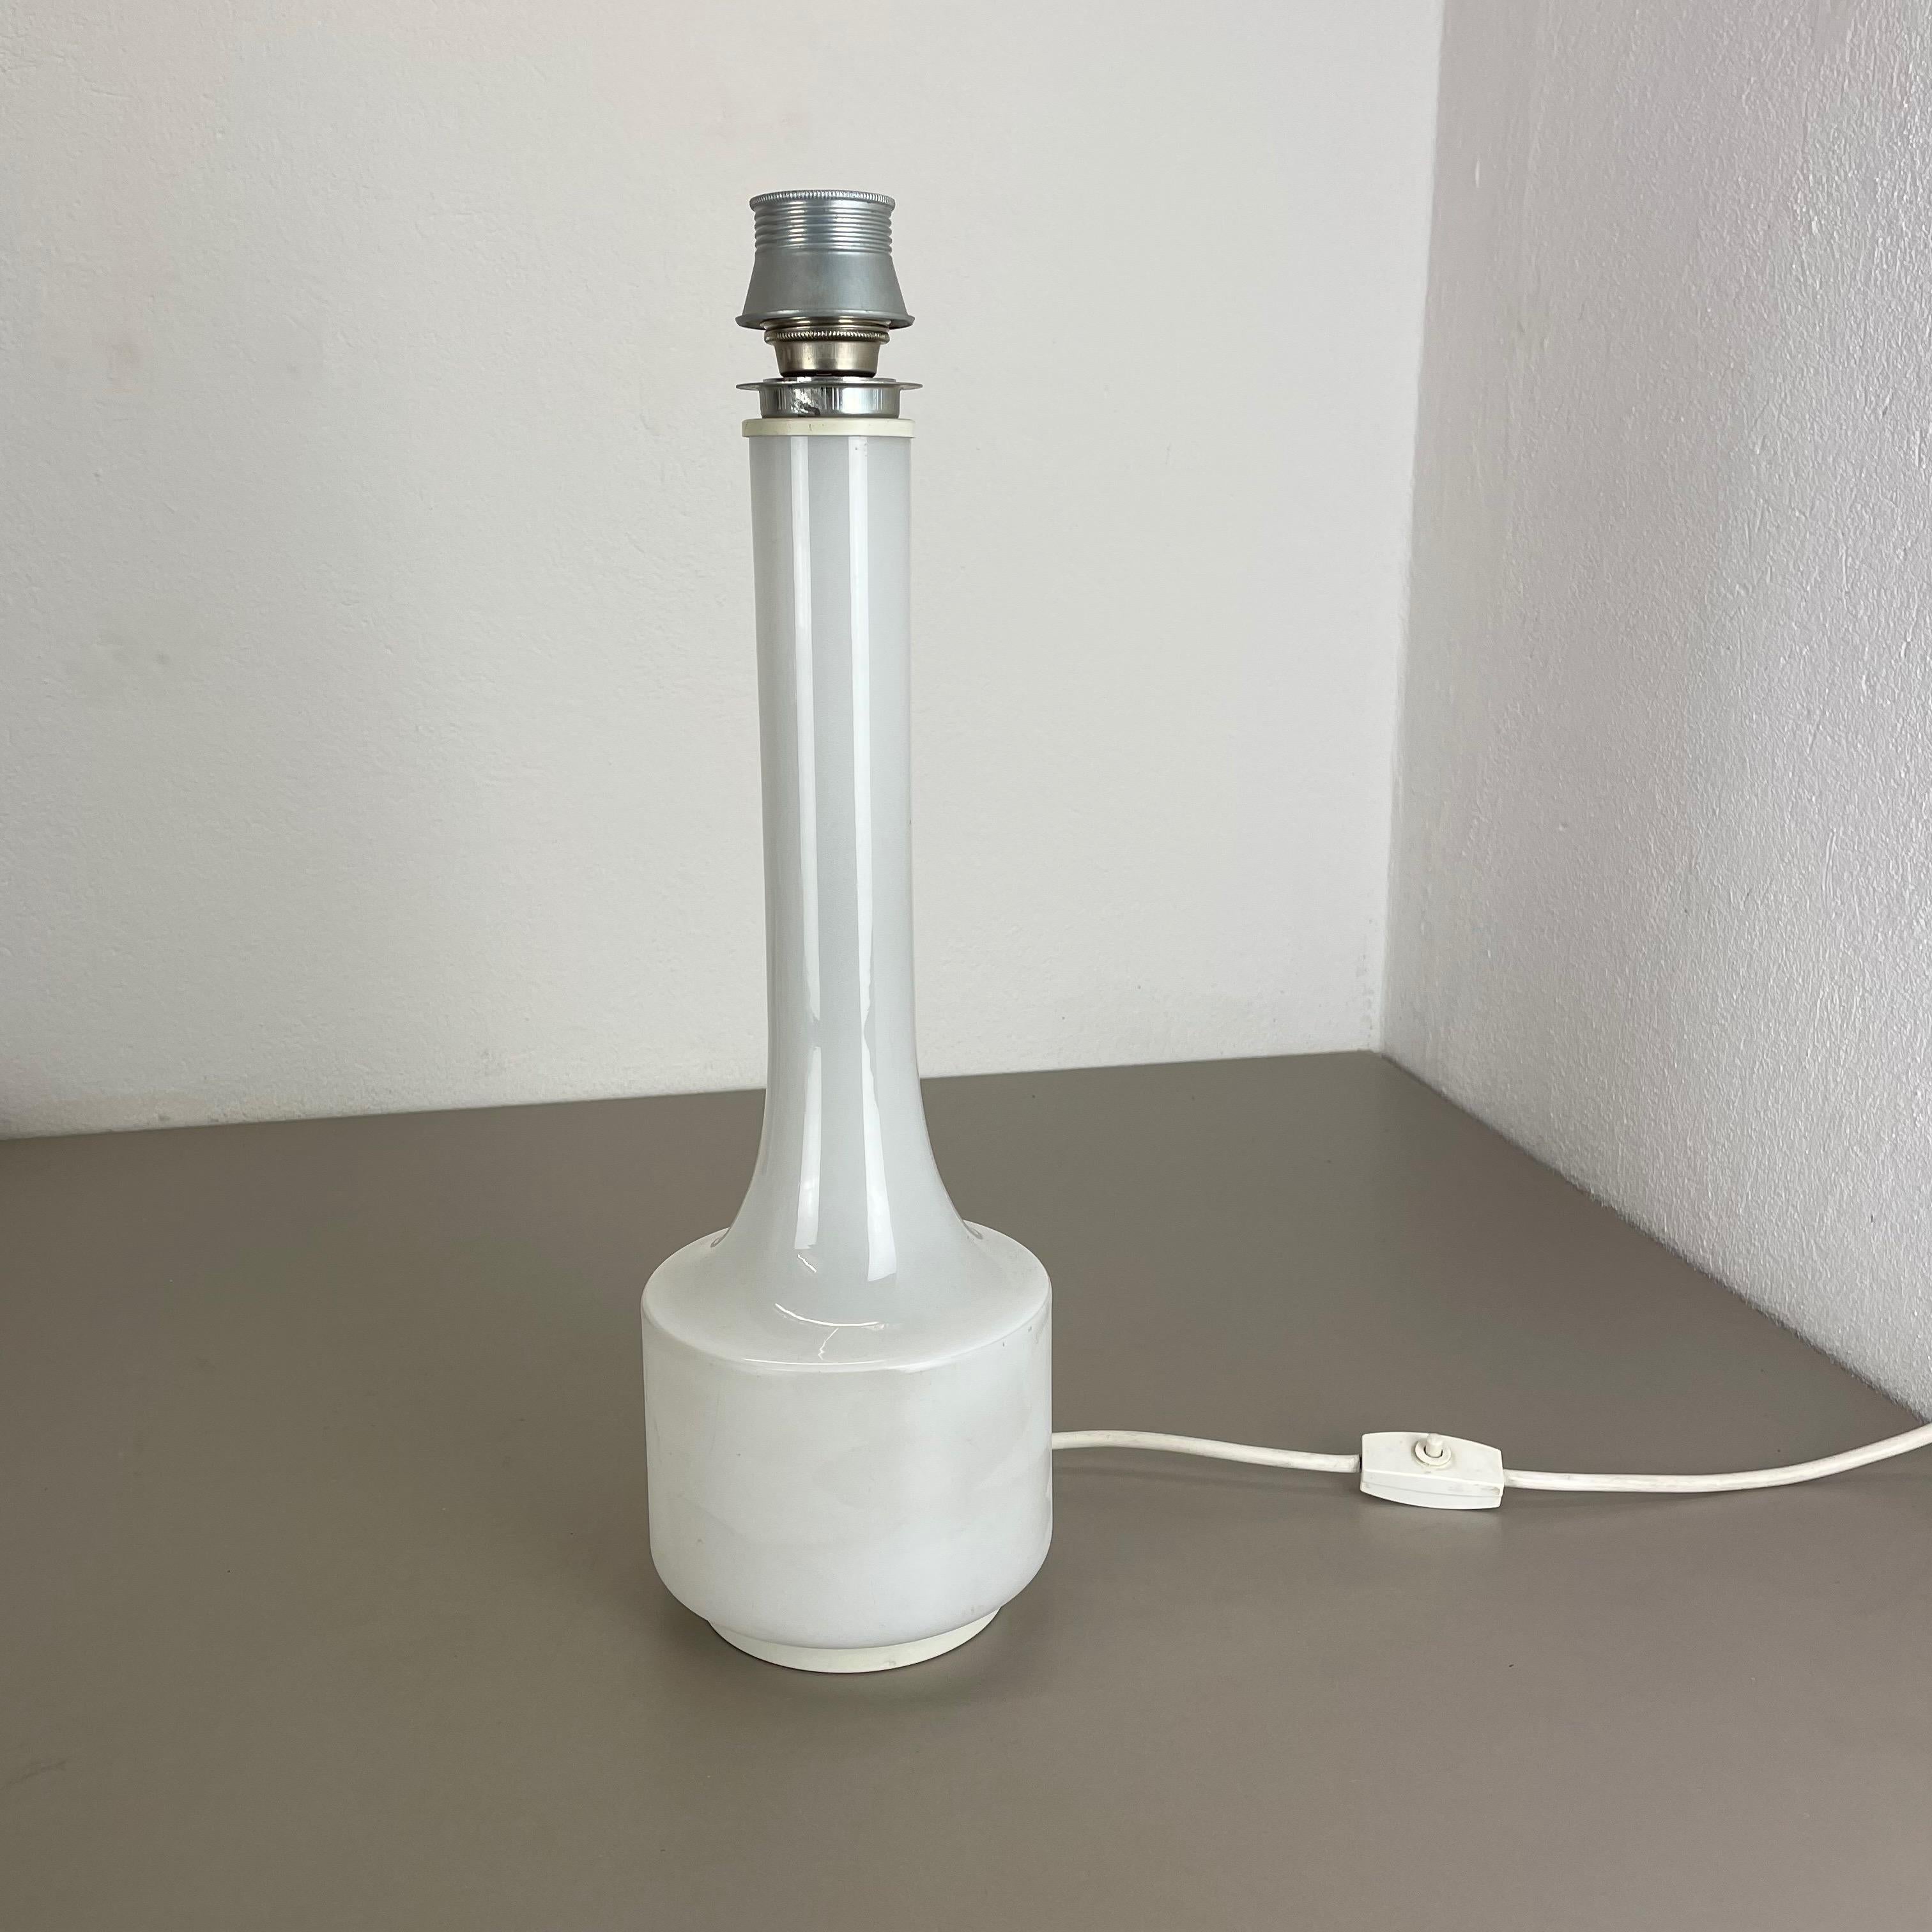 Modernist White Satin Glass Table Light Base by Doria Lights, 1970s, Germany In Good Condition For Sale In Kirchlengern, DE